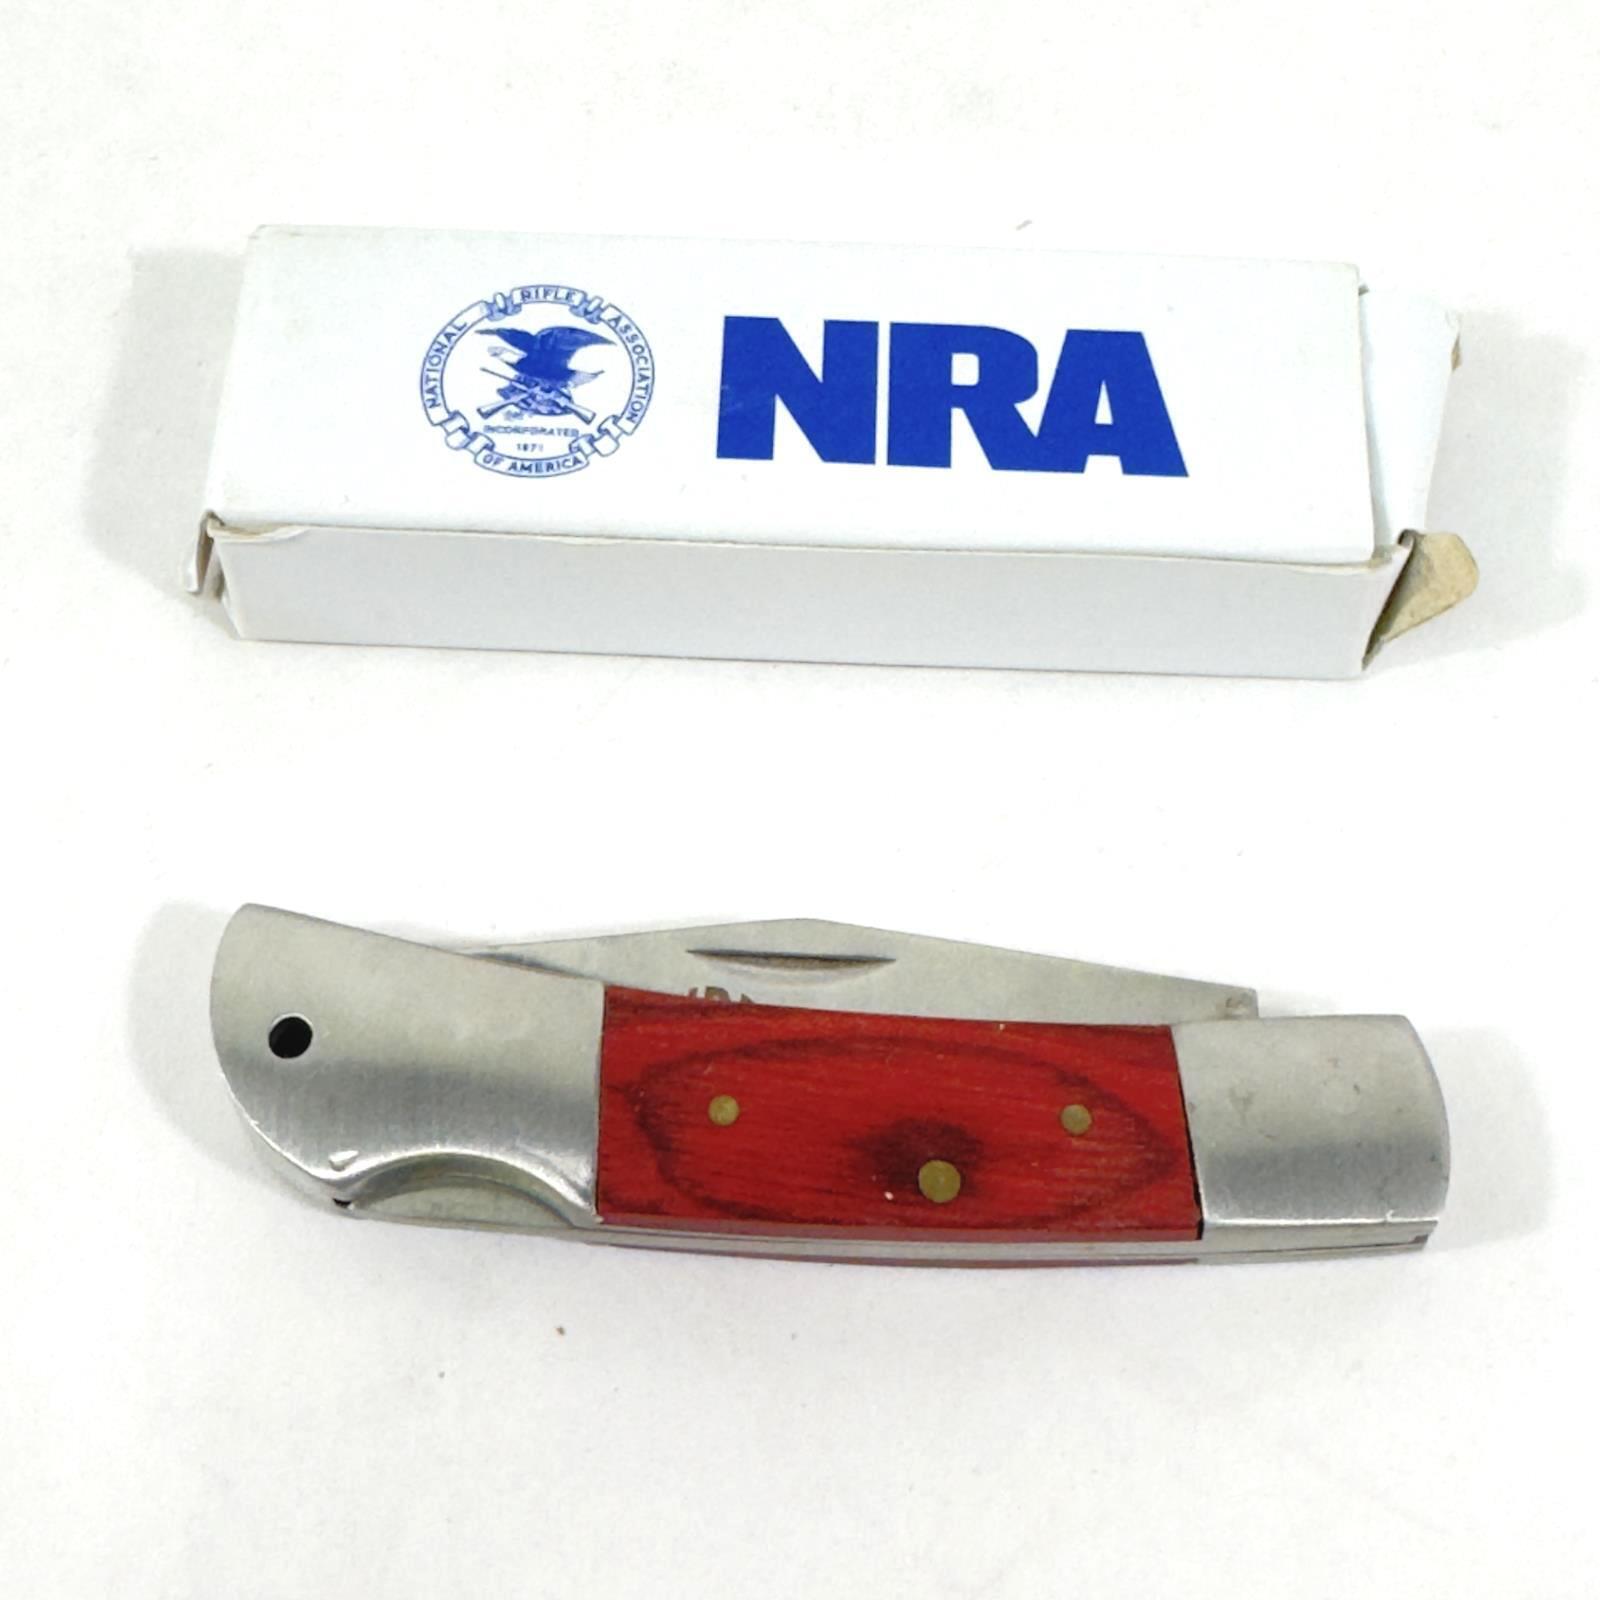 NRA 440 Stainless Steel Folding Pocket Knife With Wood Handle